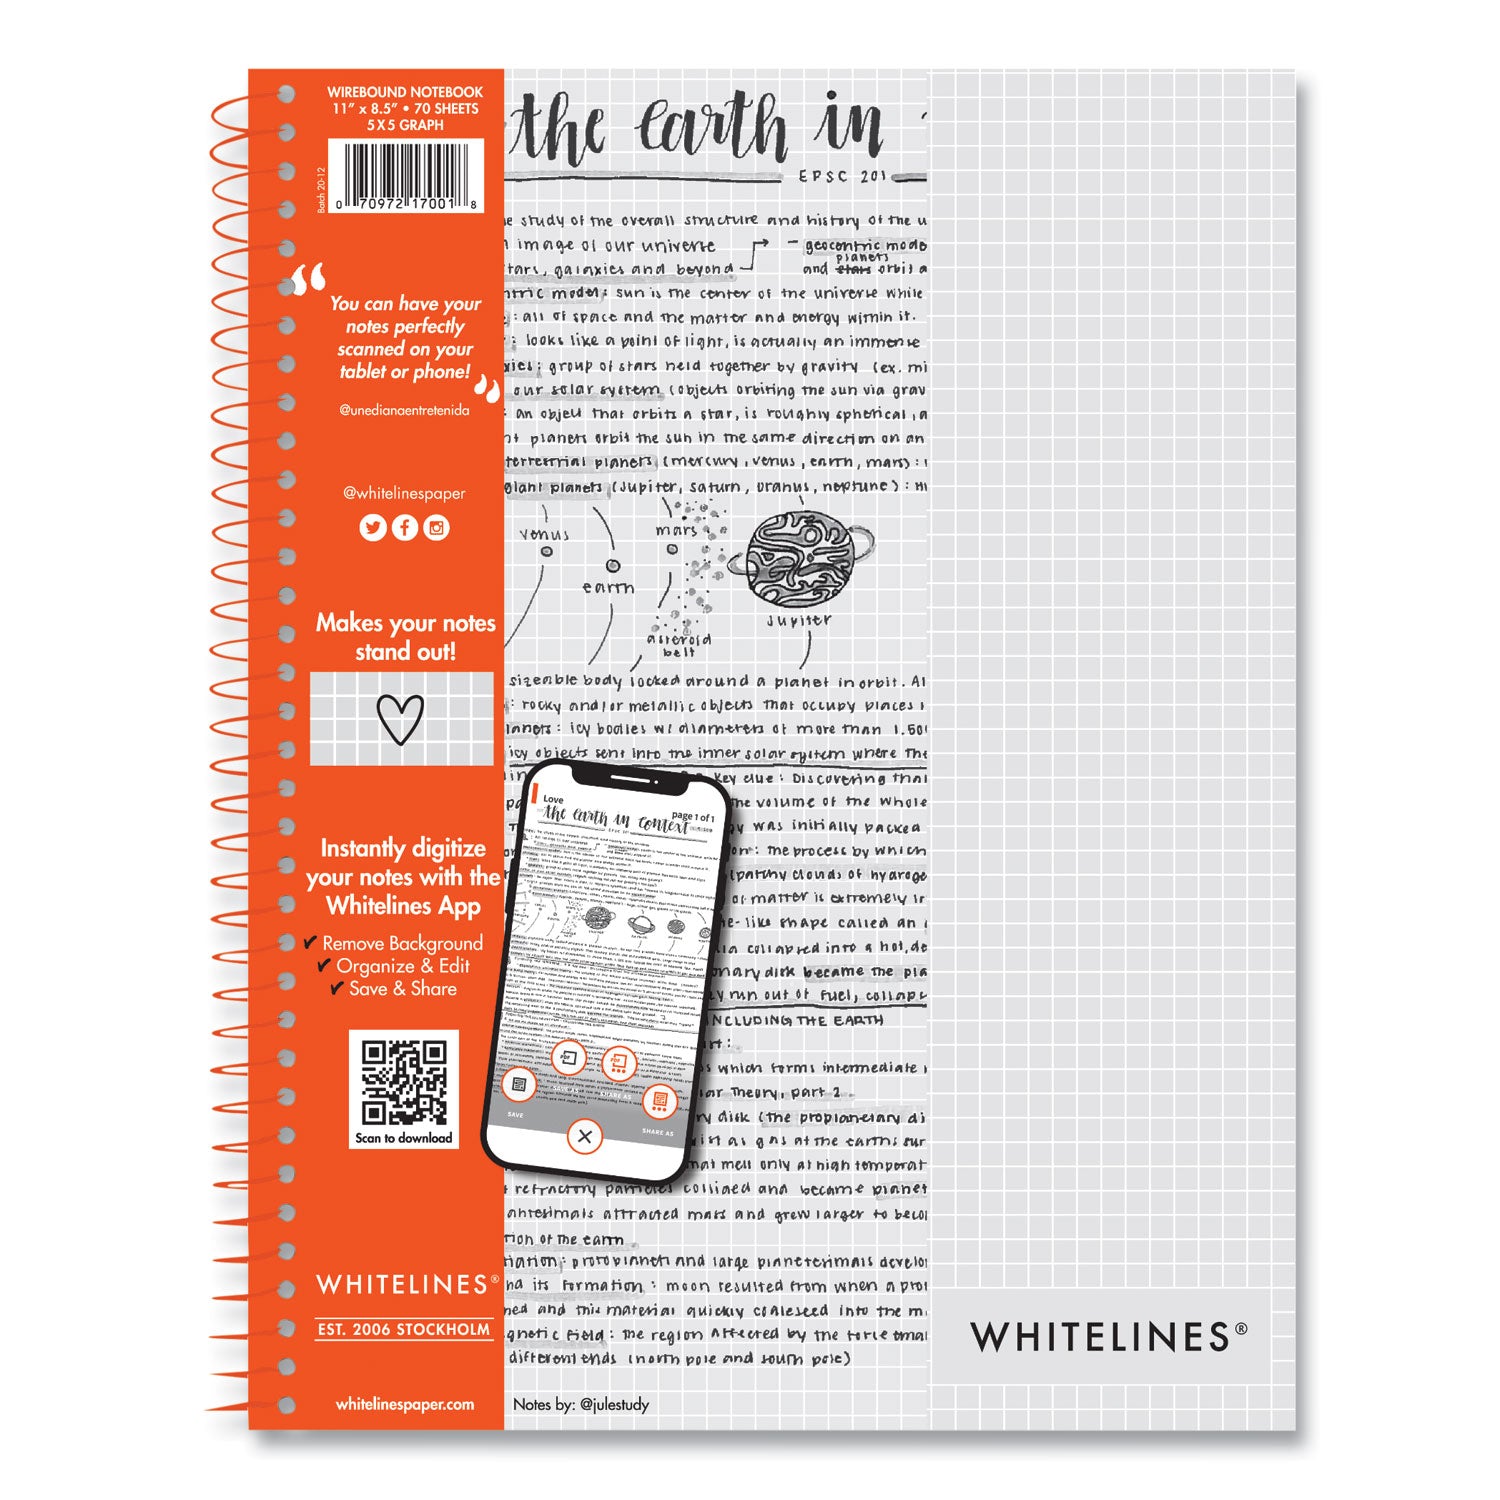 whitelines-notebook-quadrille-rule-5-sq-in-gray-orange-cover-70-11-x-85-sheets-12-ct-ships-in-4-6-business-days_roa17001cs - 2